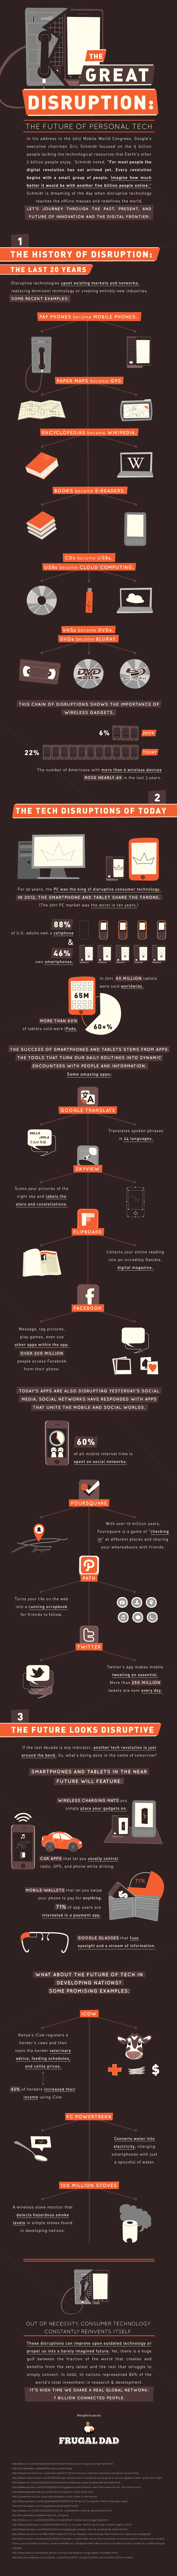 Personal Technology Infographic